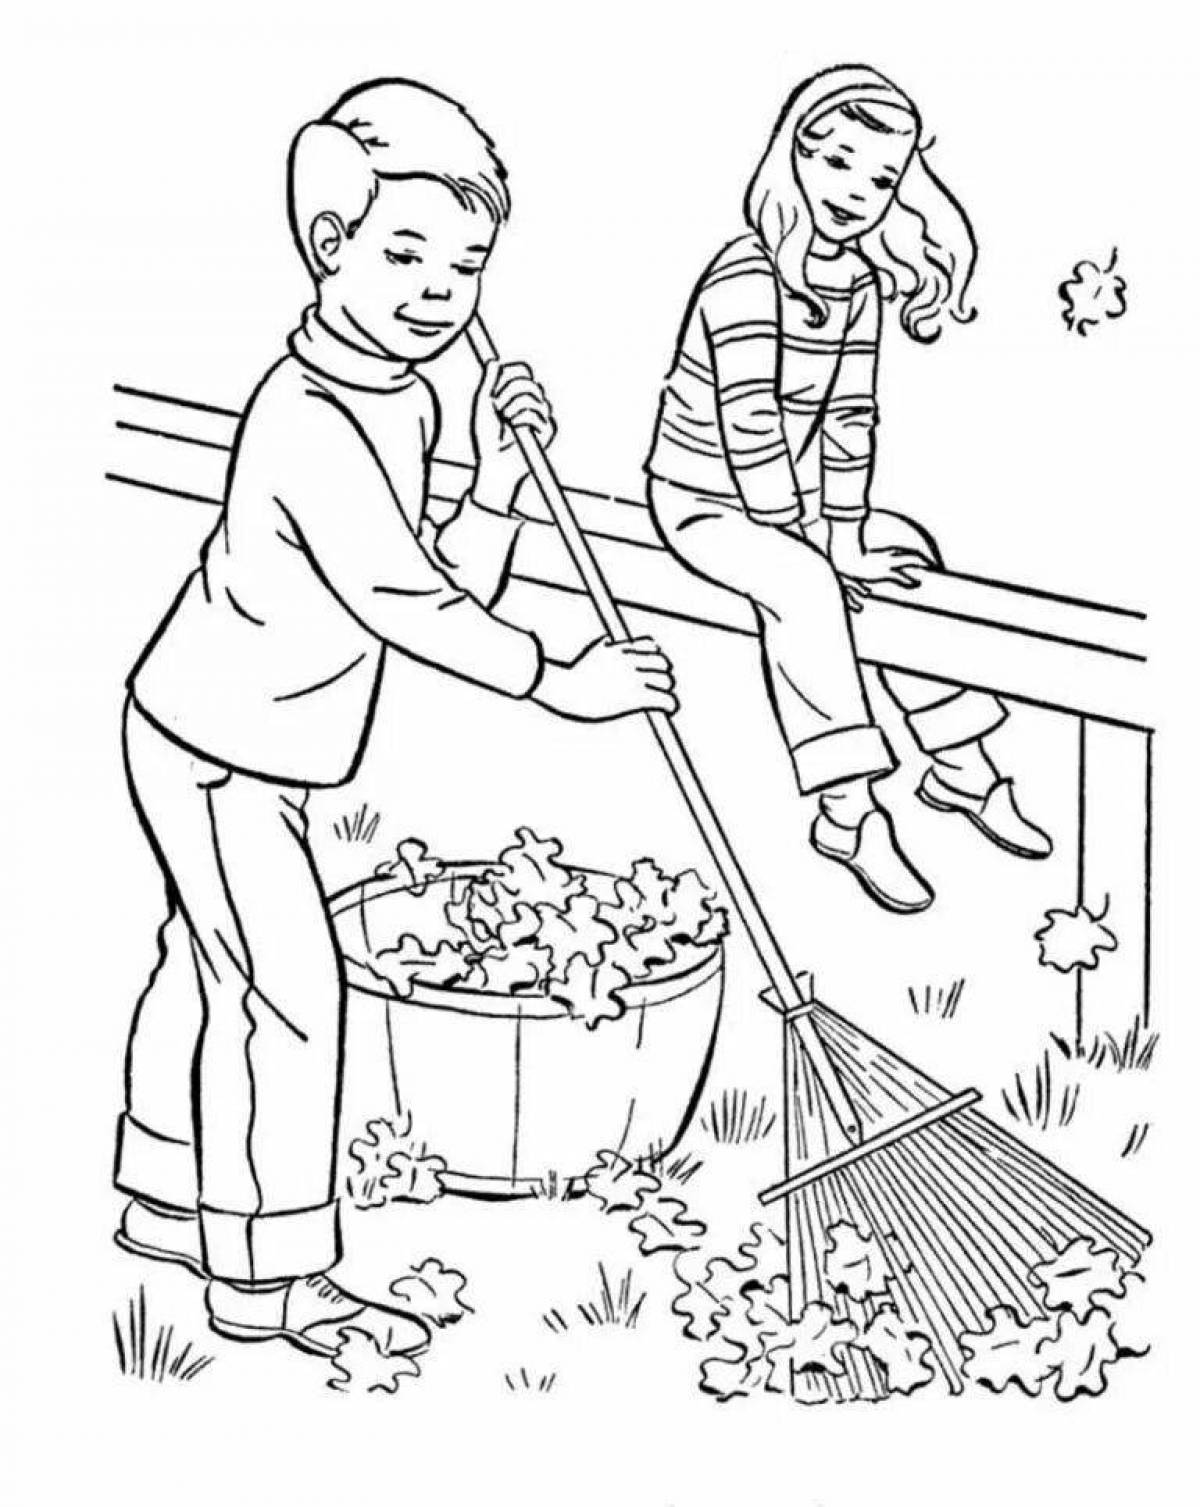 Innovative Good Deeds coloring page